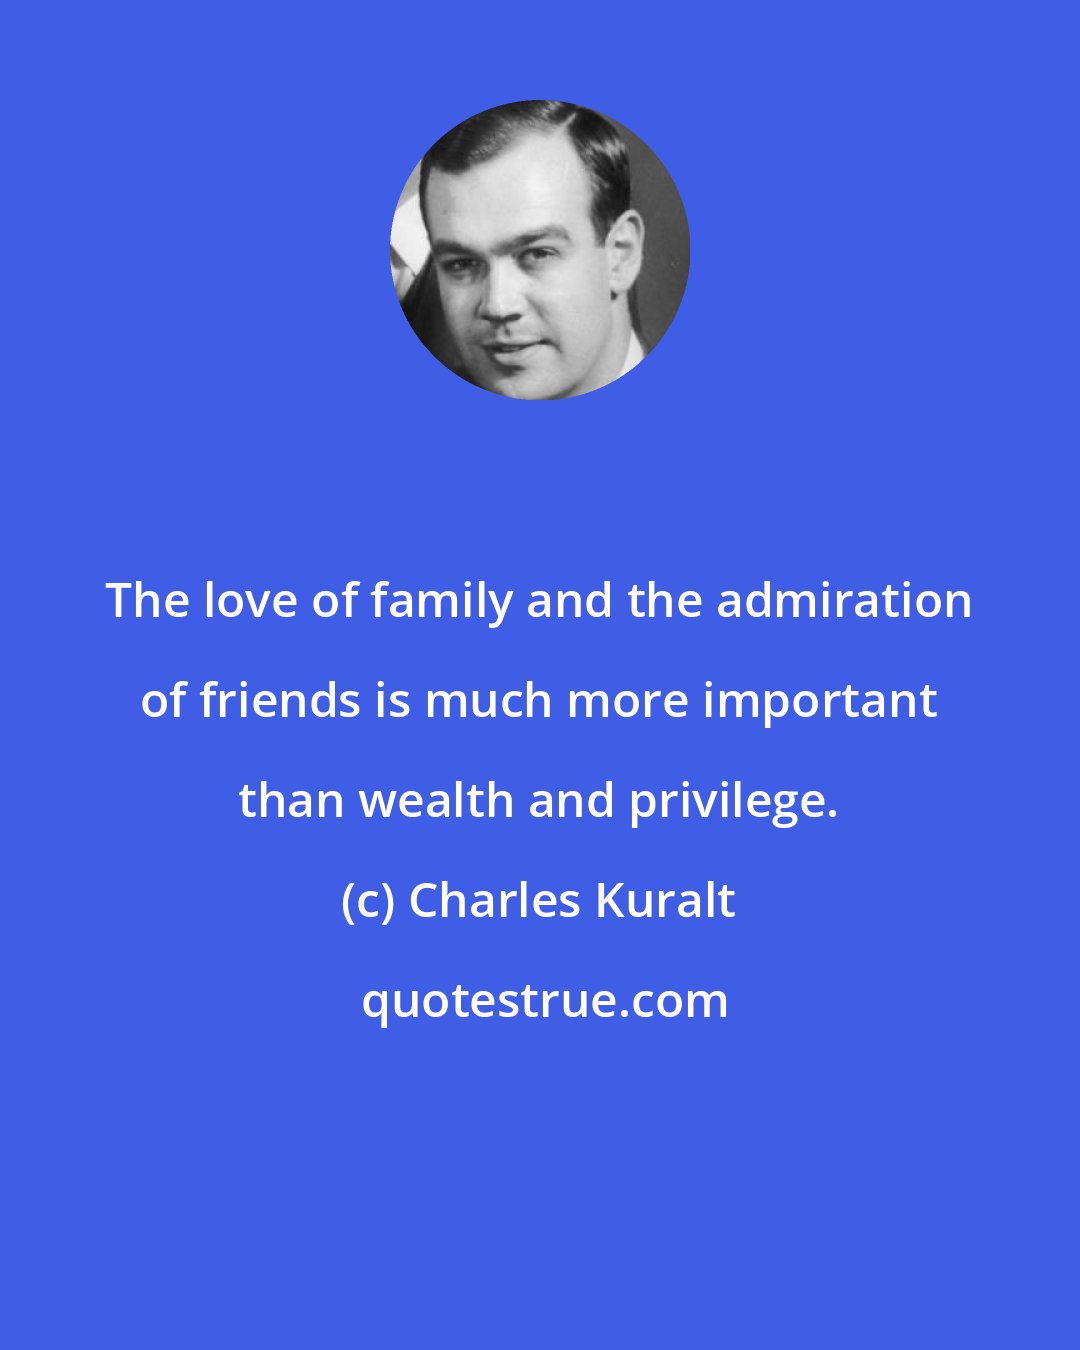 Charles Kuralt: The love of family and the admiration of friends is much more important than wealth and privilege.